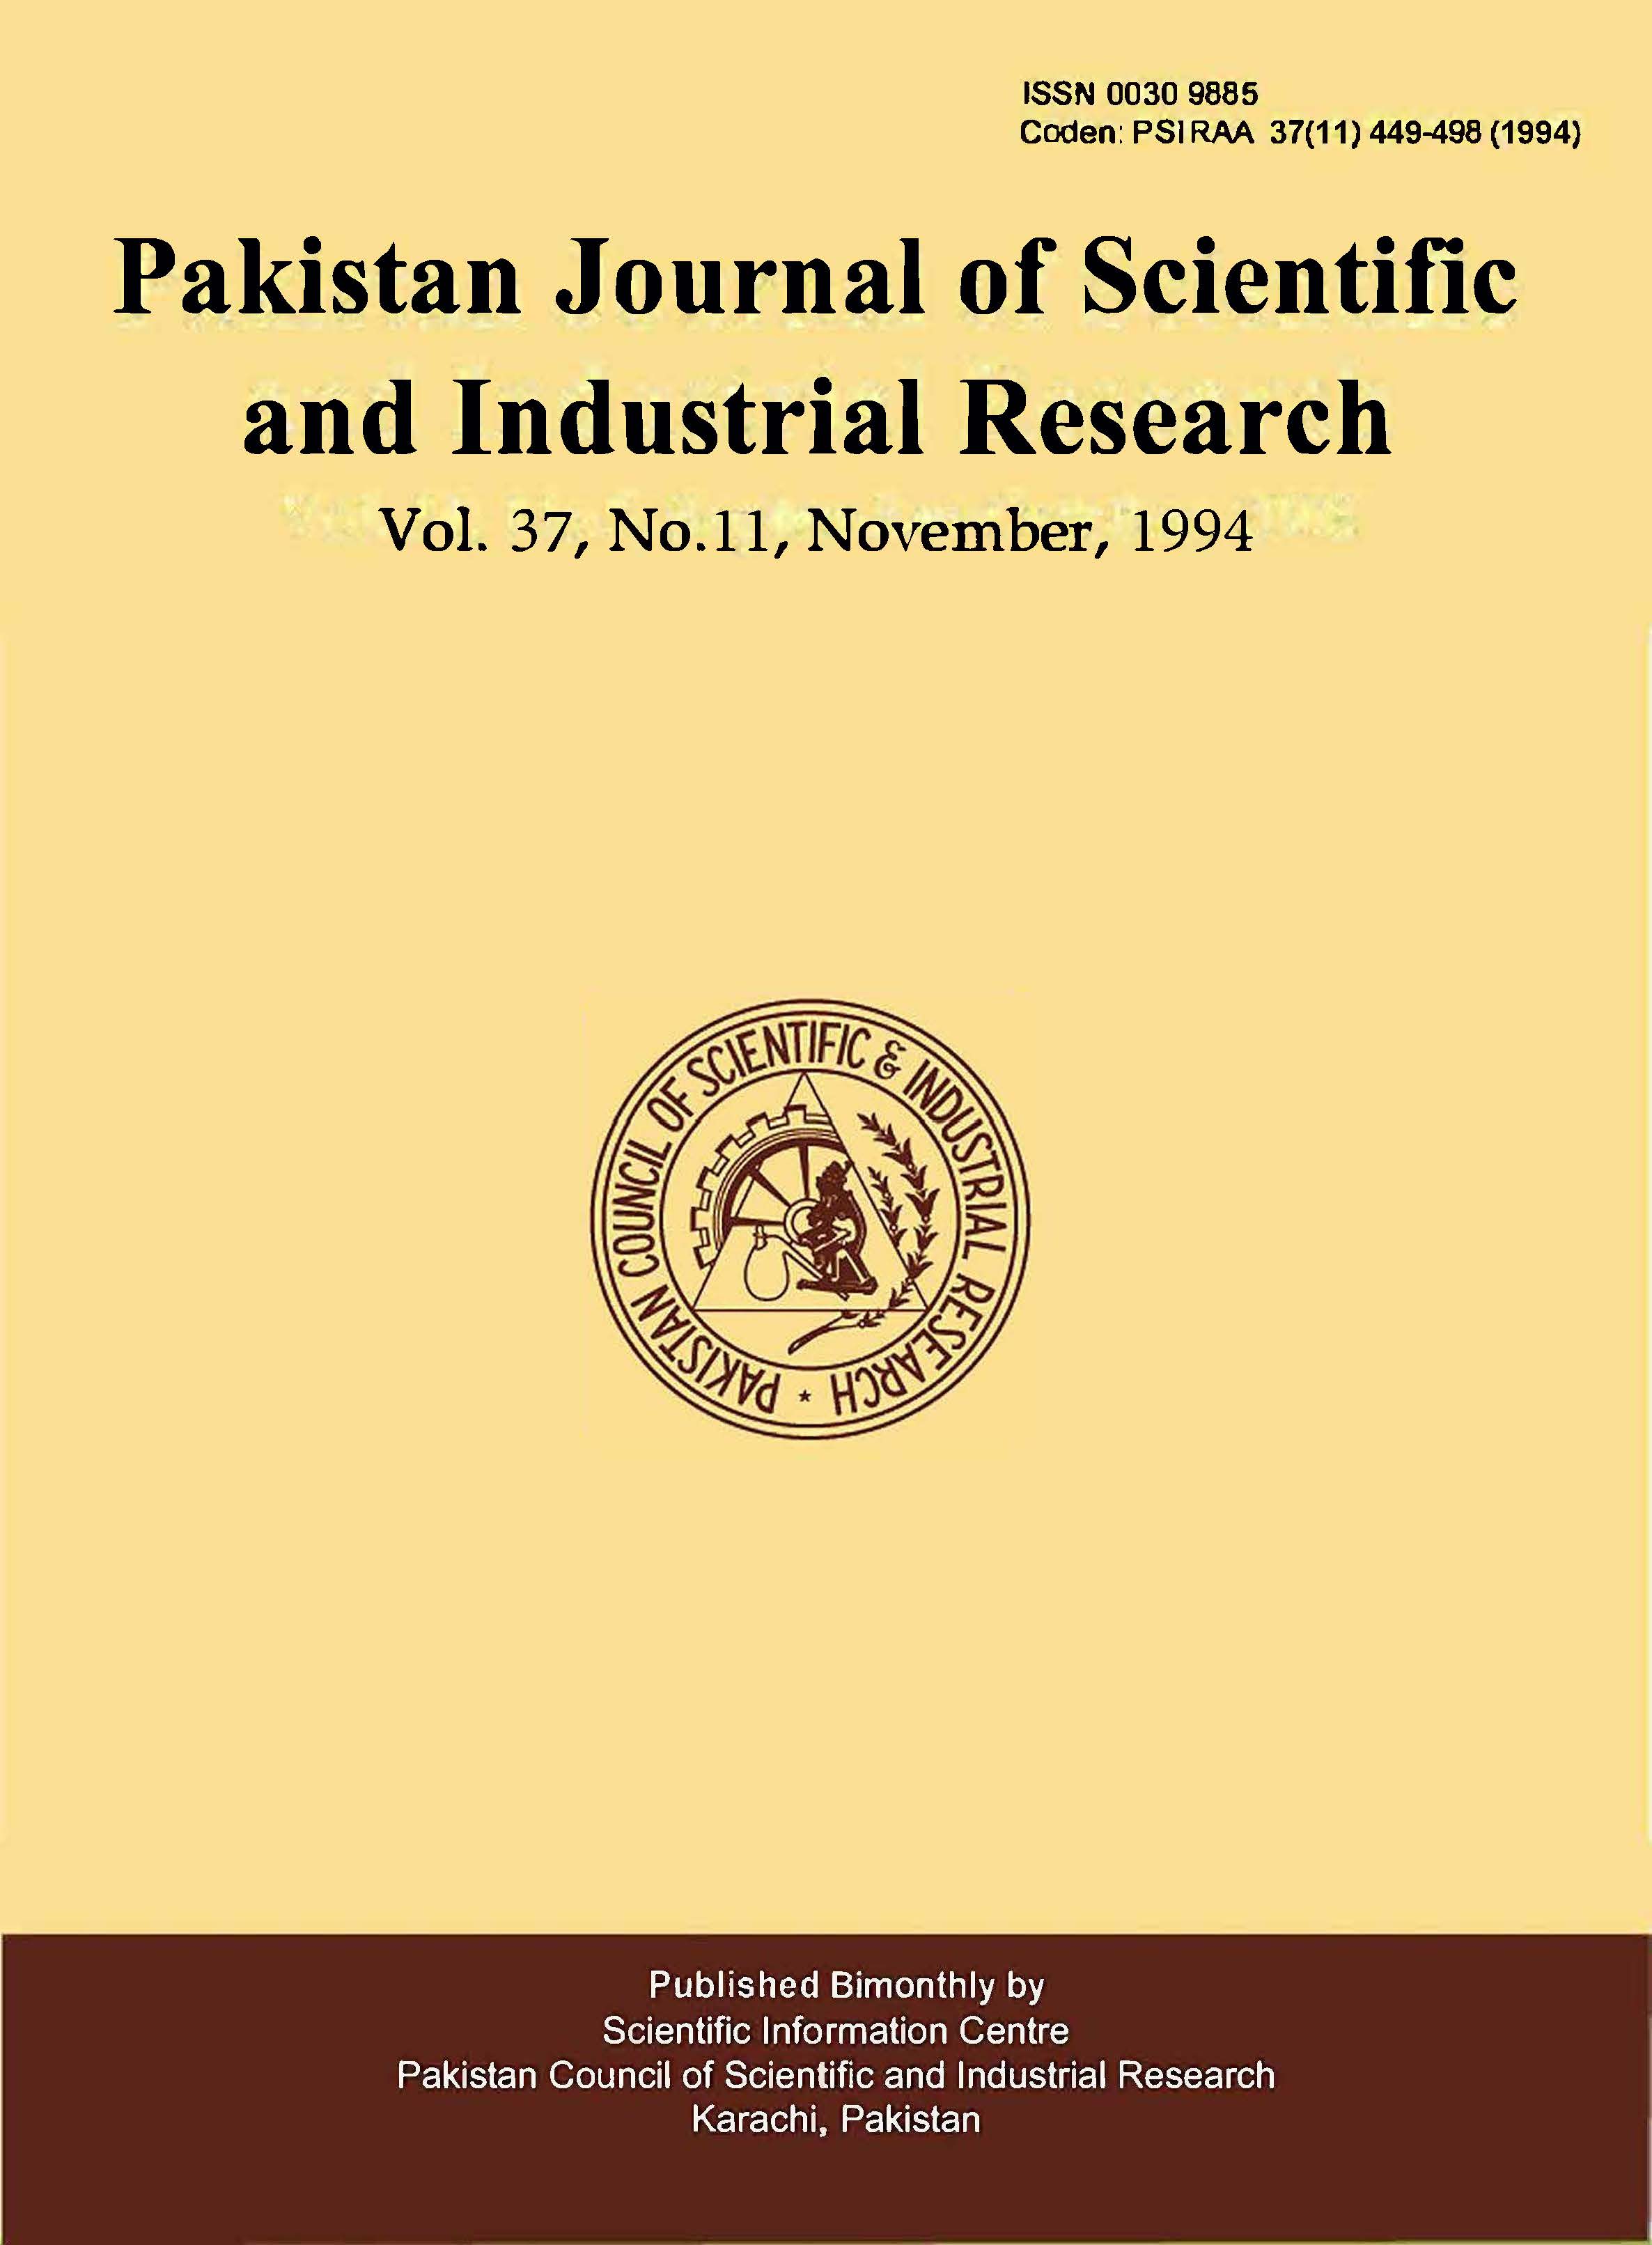 					View Vol. 37 No. 11 (1994): Pakistan Journal of Scientific and Industrial Research
				